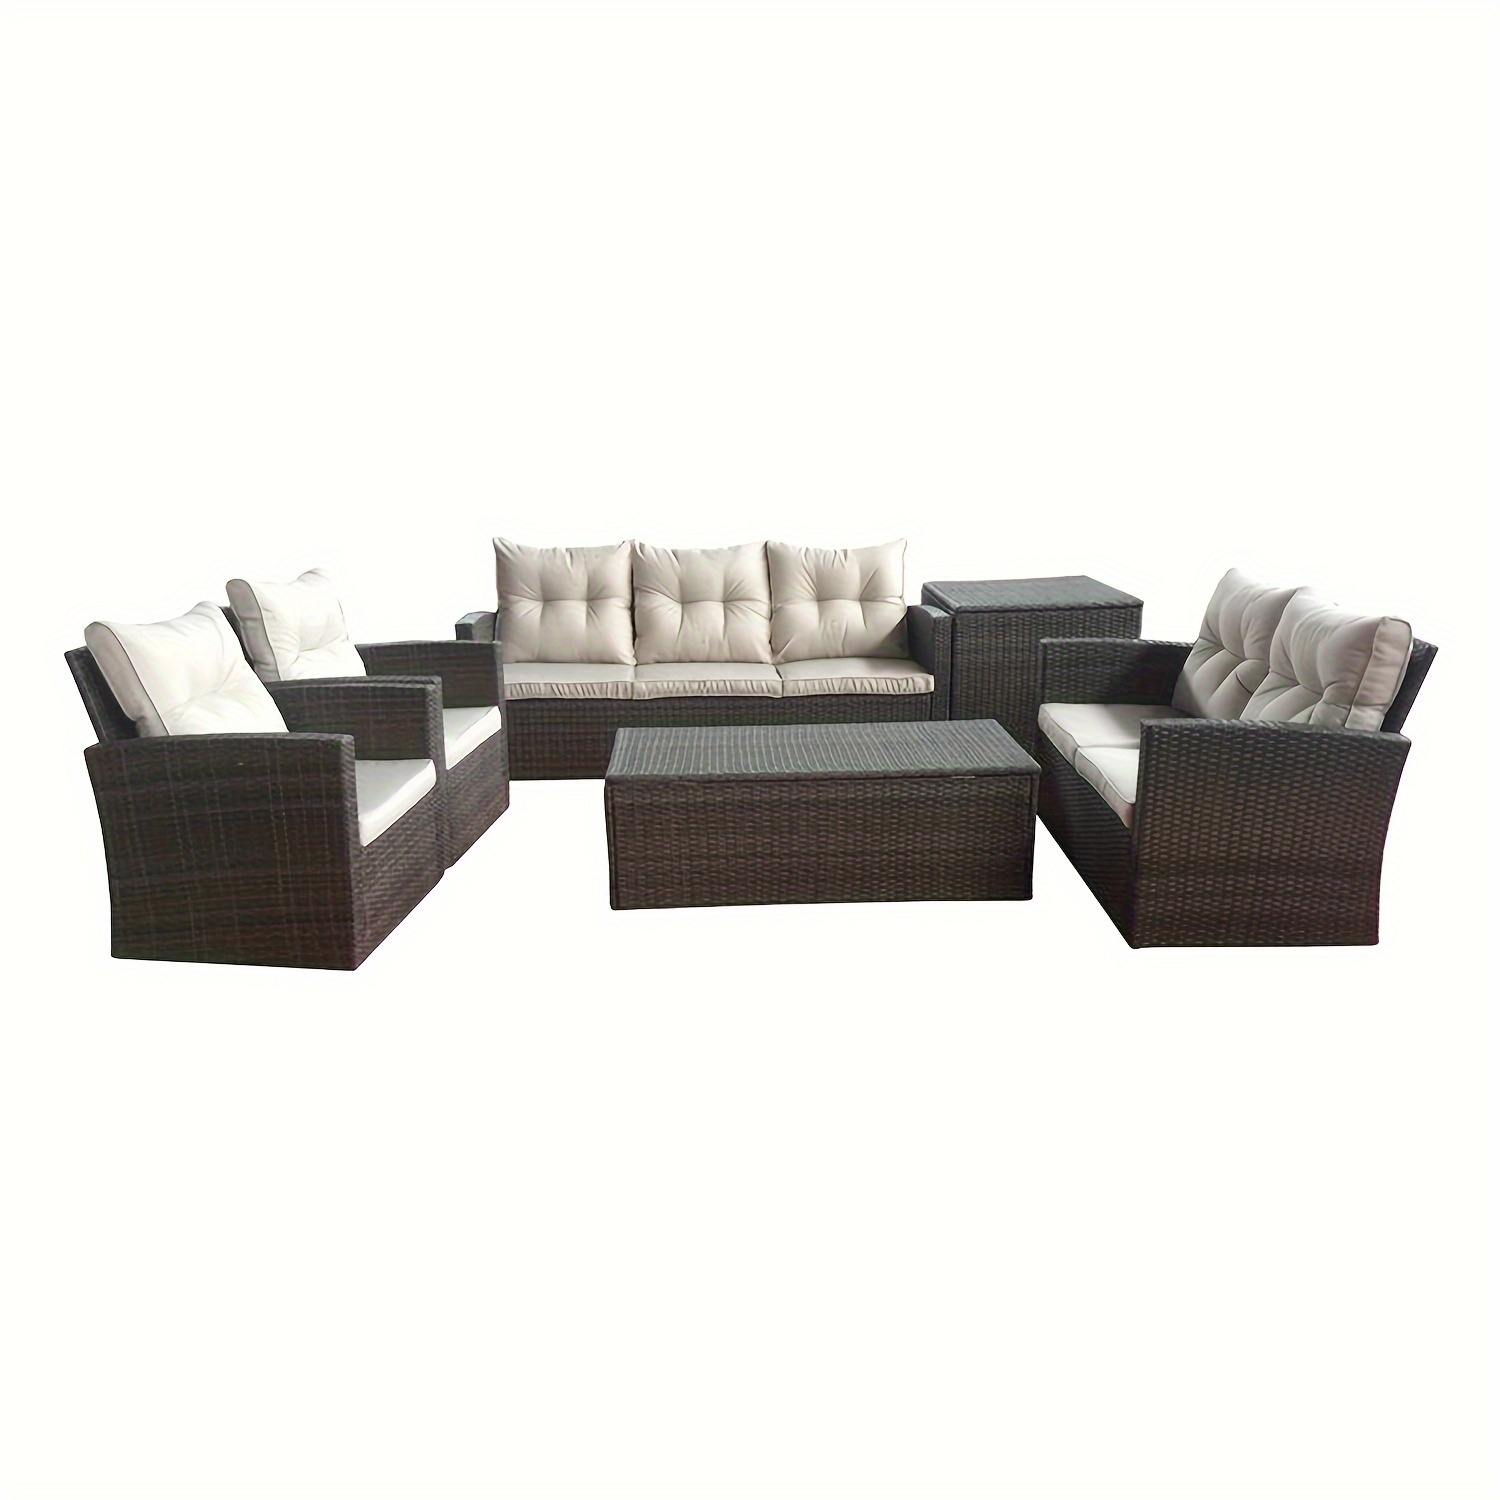 

6pcs Rattan Sectional Sofa Set, 7-seater Outdoor Patio Furniture With Love Seats, Chairs, Cushions & Table, Steel Frame, Garden Lawn Pool Backyard Lounge Decor